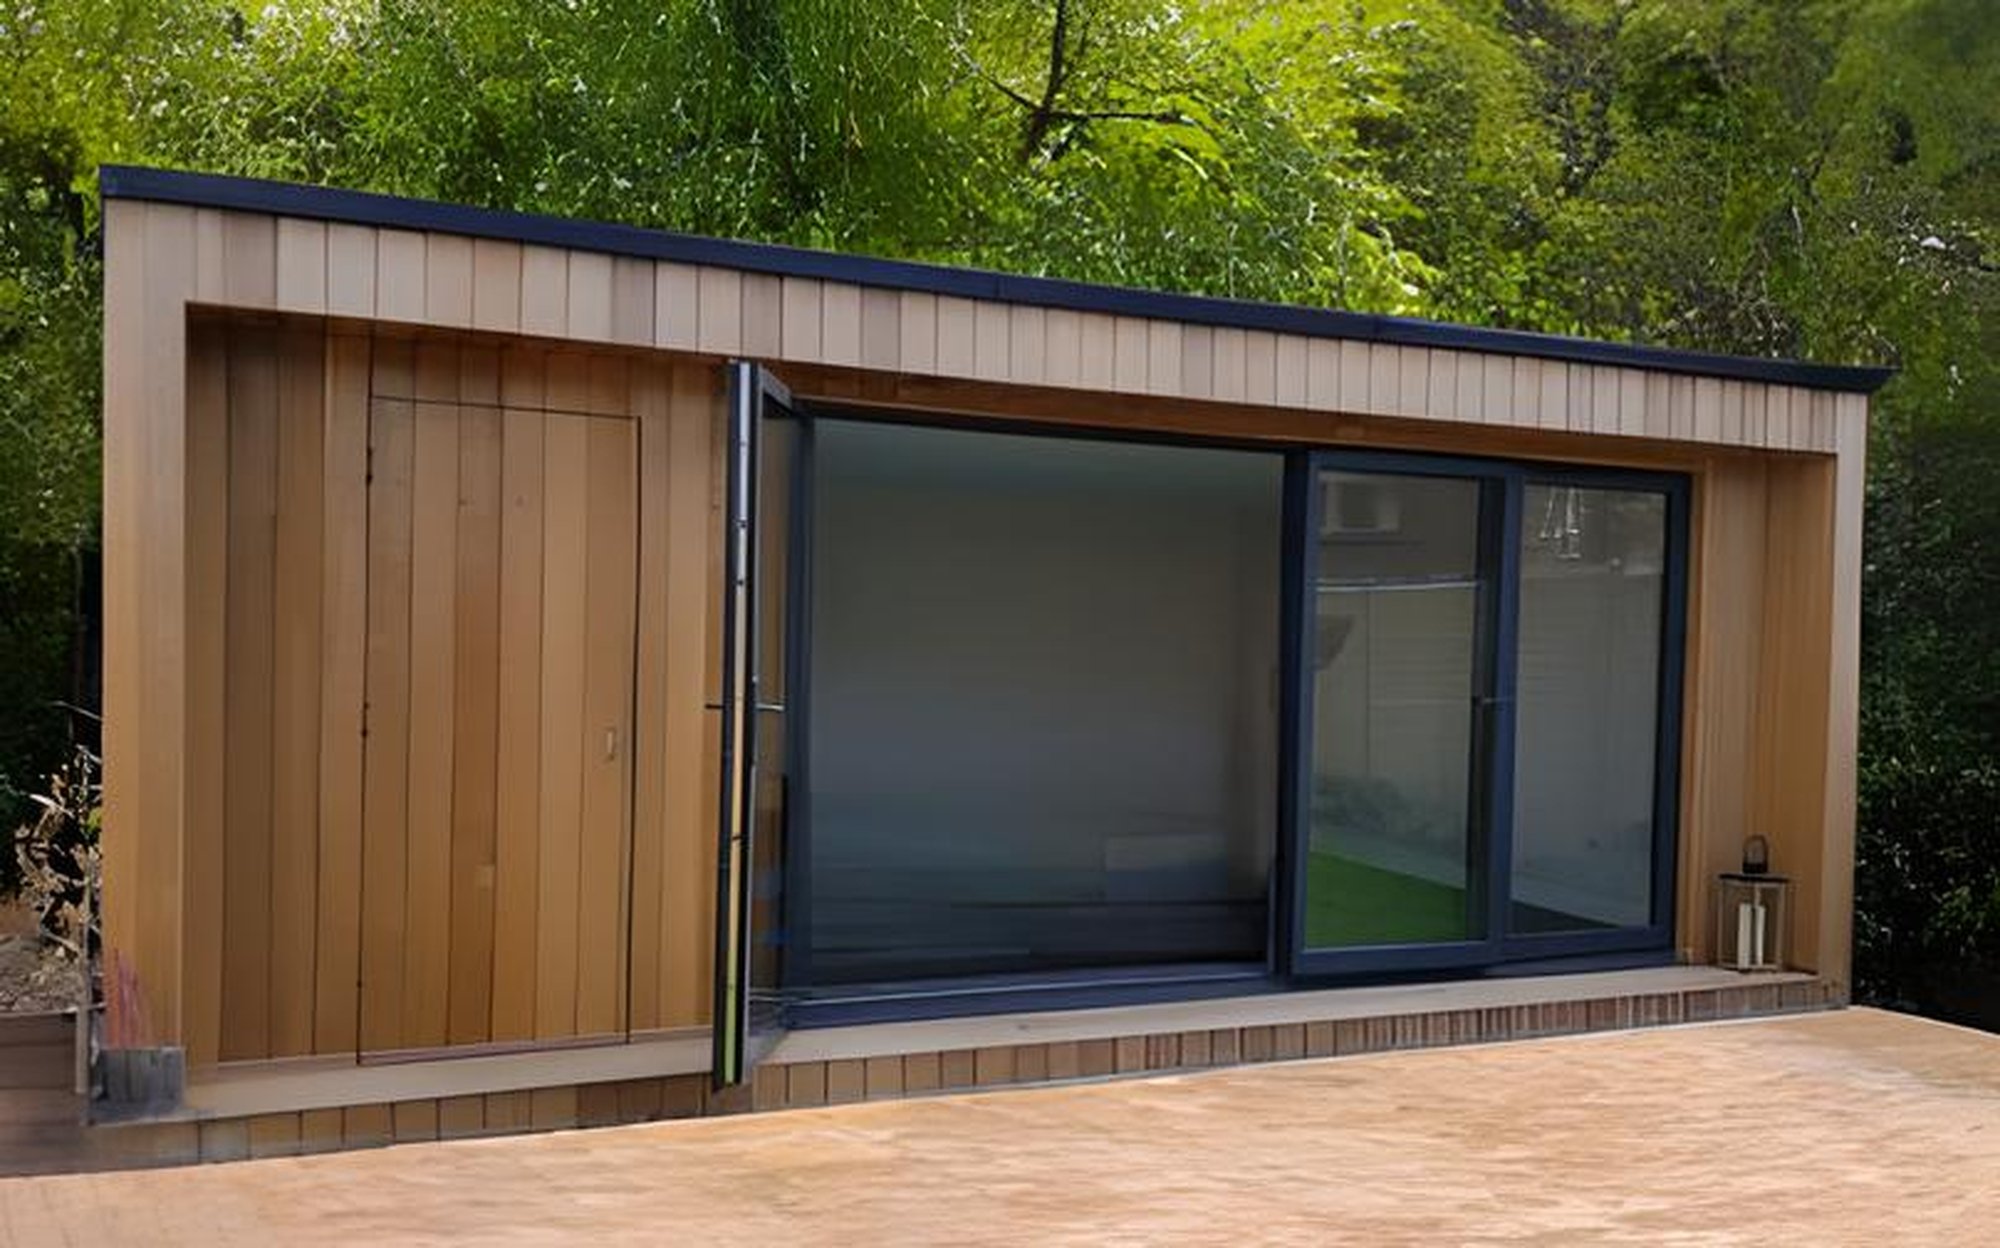 Garden Room with vertical wood cladding, anthracite bifold doors and block pathed drive, located in a wooded garden